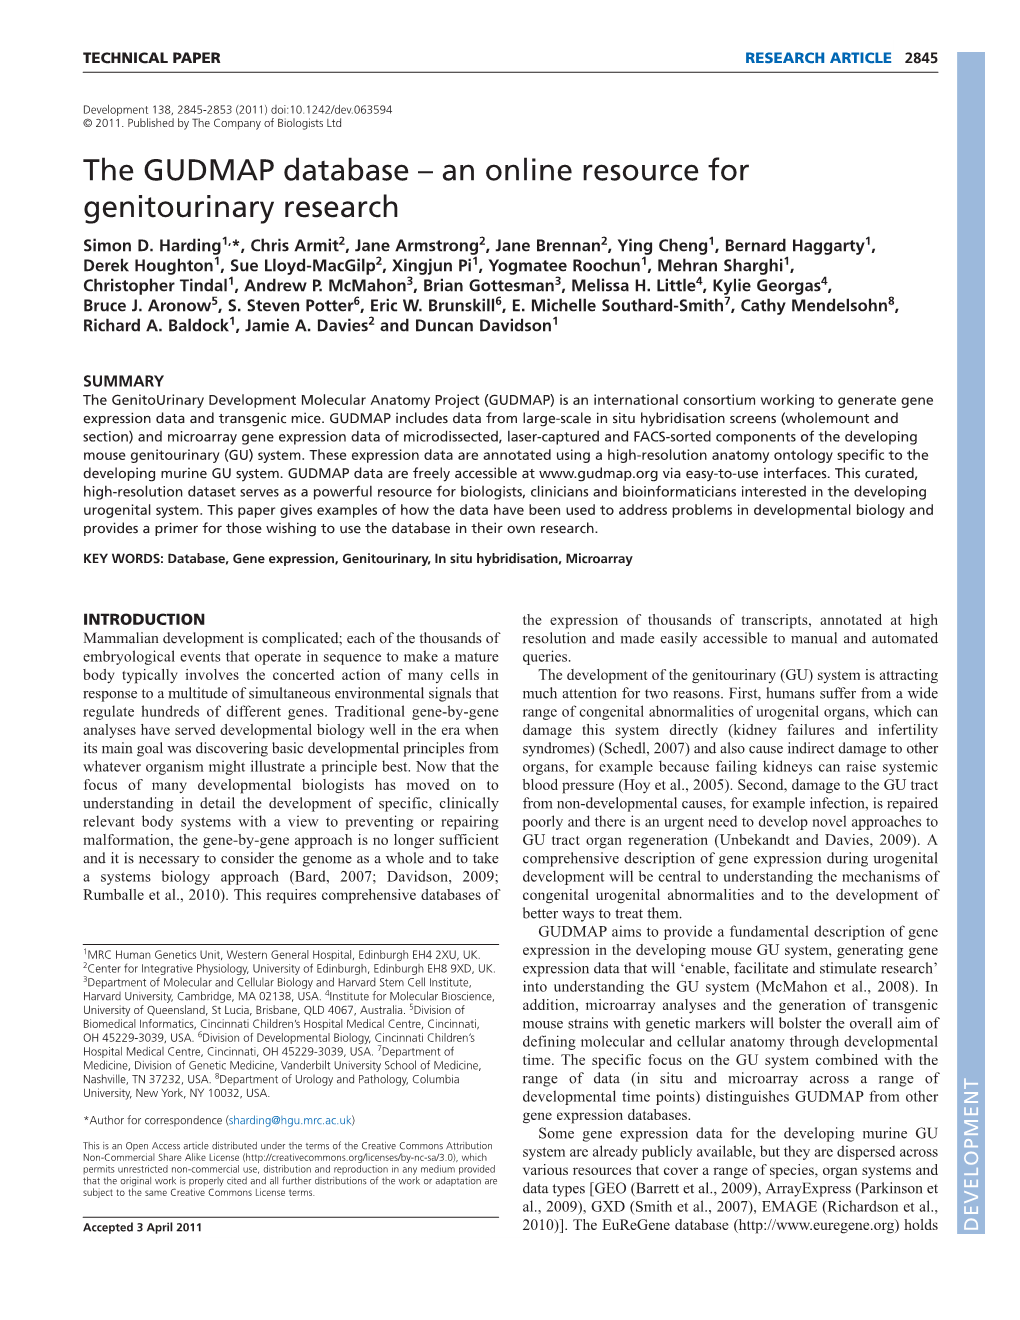 The GUDMAP Database – an Online Resource for Genitourinary Research Simon D